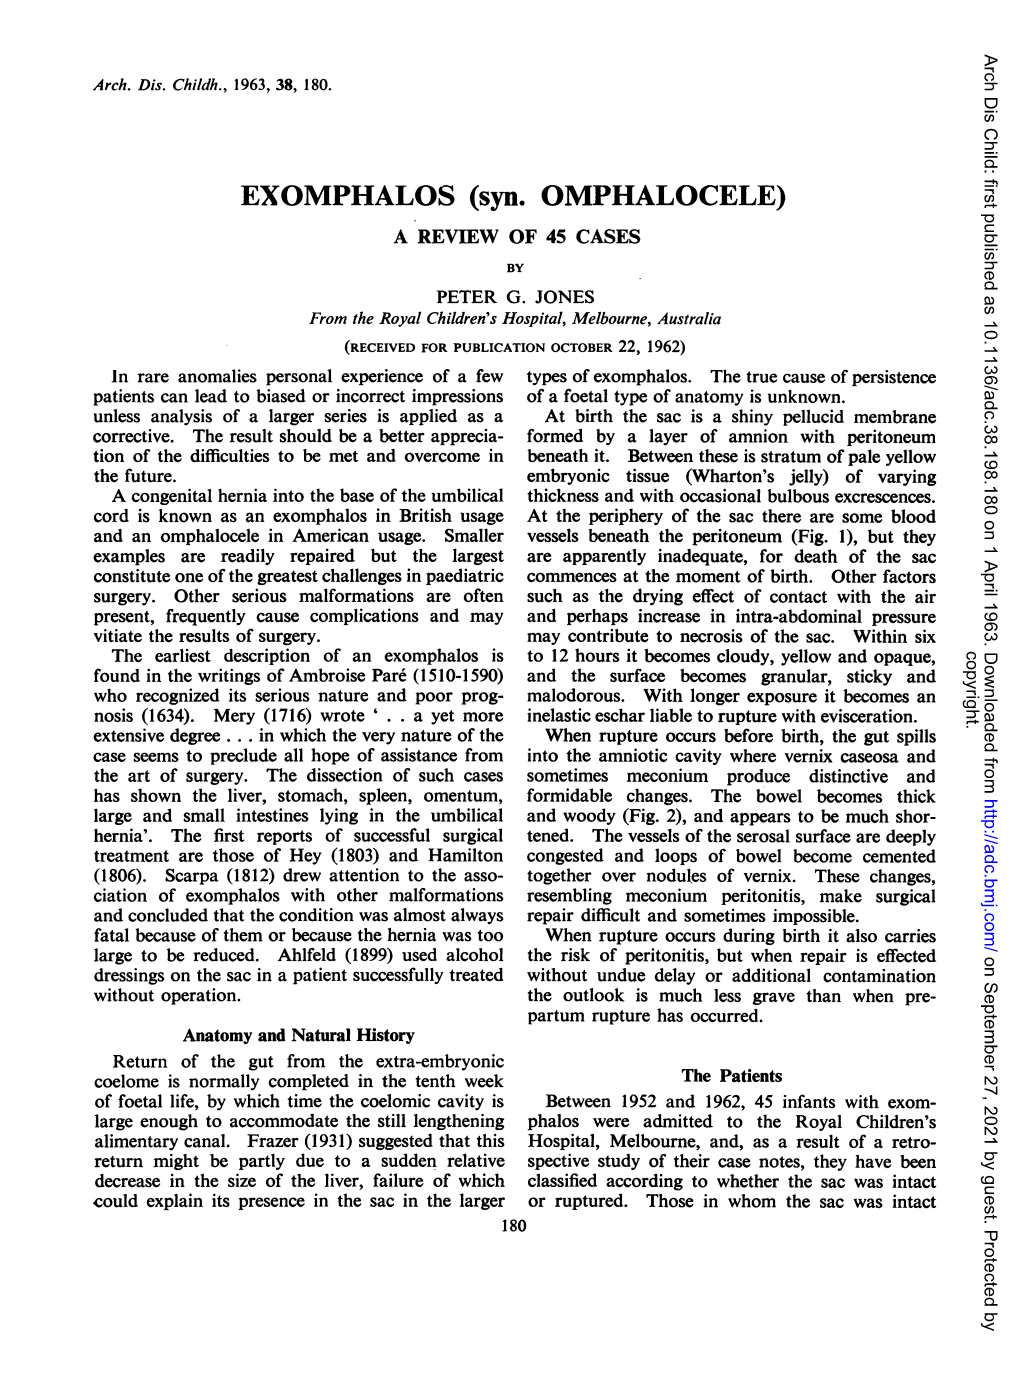 EXOMPHALOS (Syn. OMPHALOCELE) a REVIEW of 45 CASES by PETER G